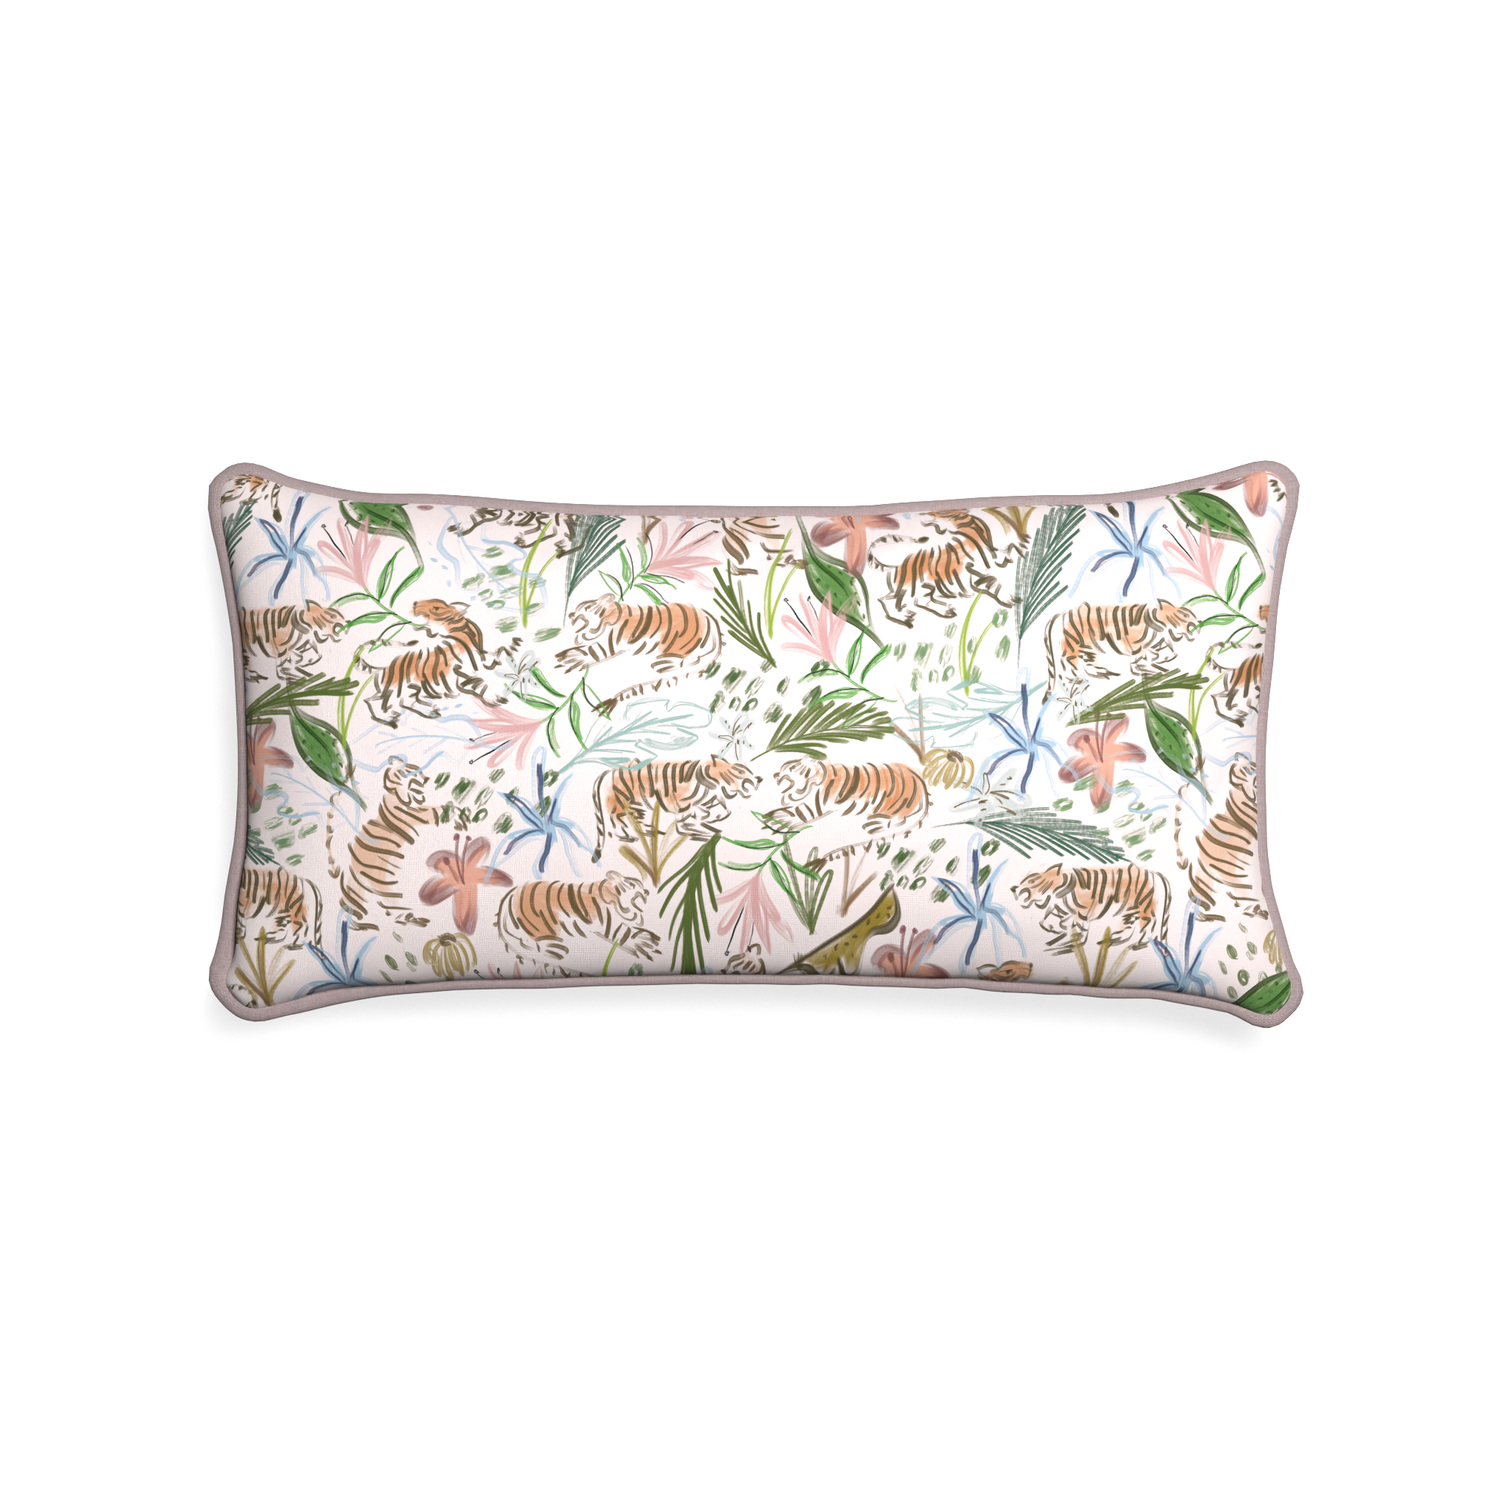 Midi-lumbar frida pink custom pink chinoiserie tigerpillow with orchid piping on white background